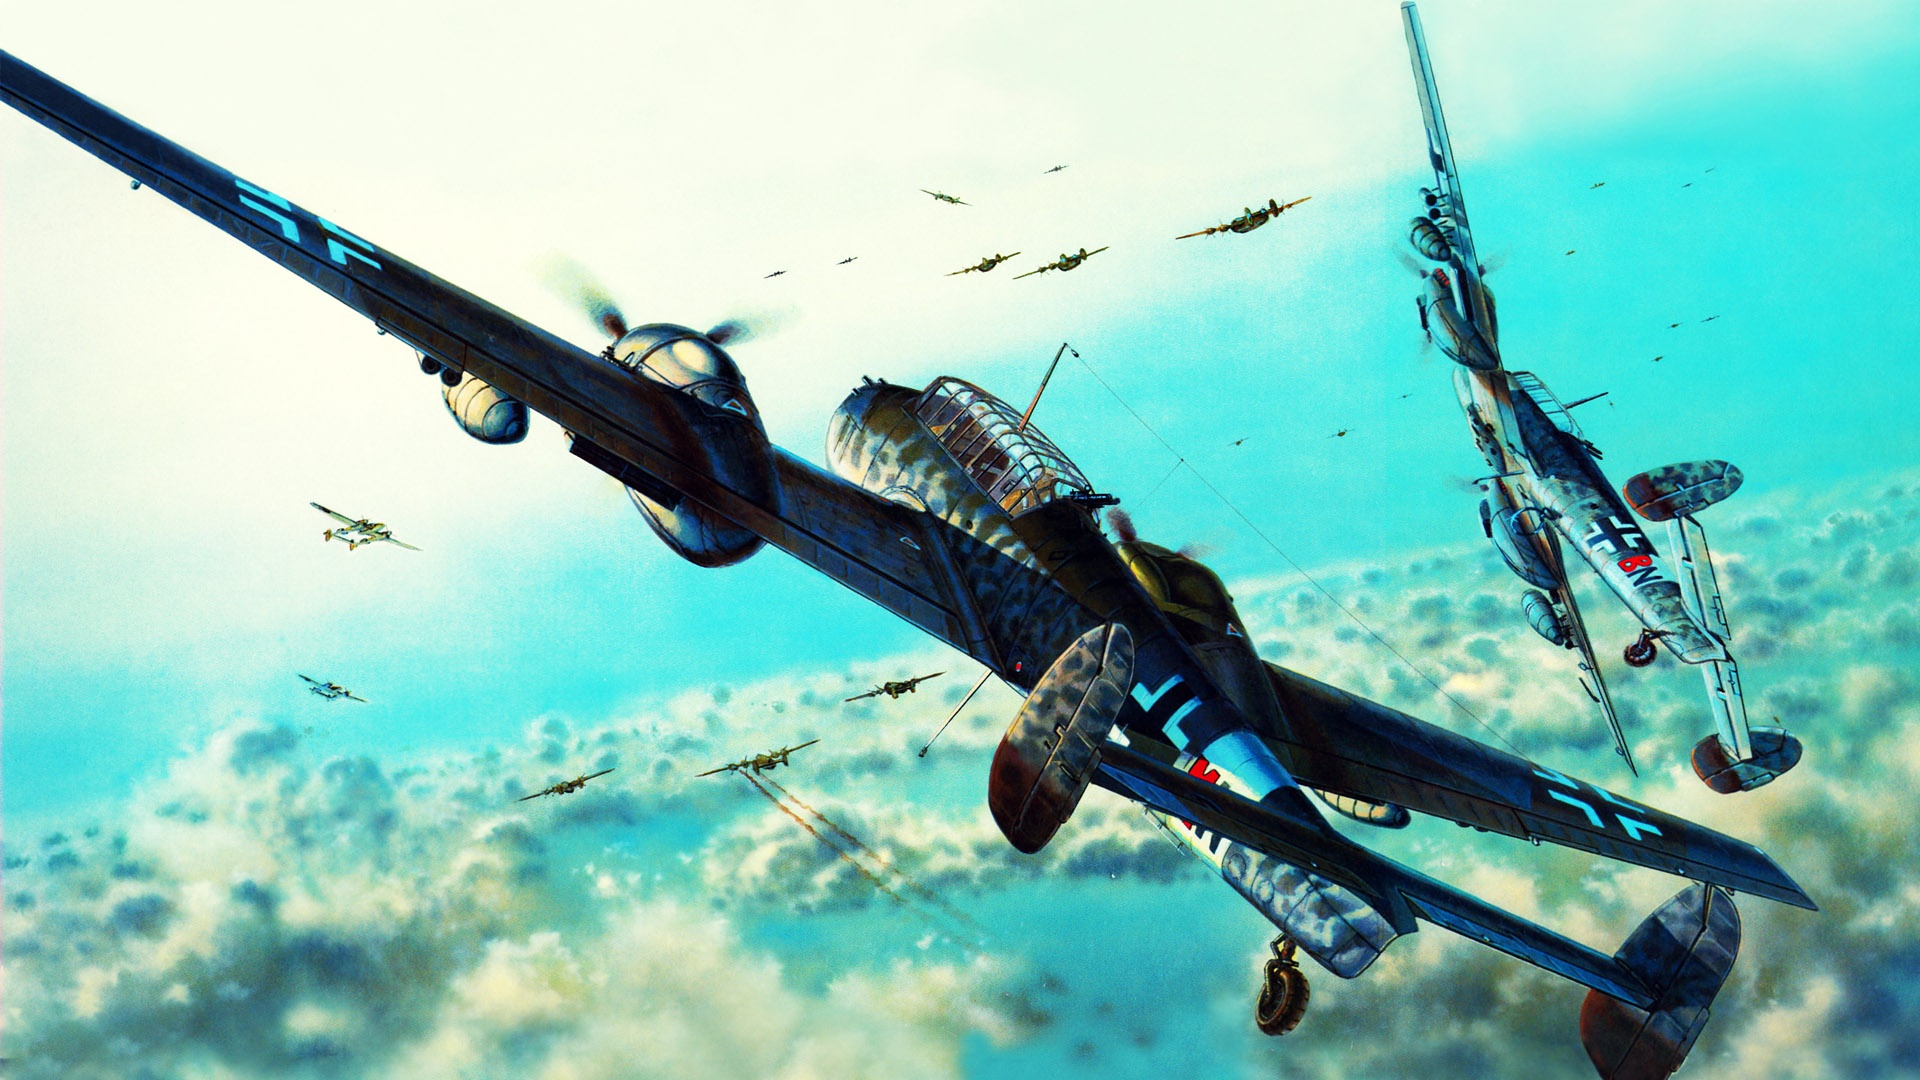 40 Wwii Fighter Planes Wallpapers 1920x1080 Wallpapersafari